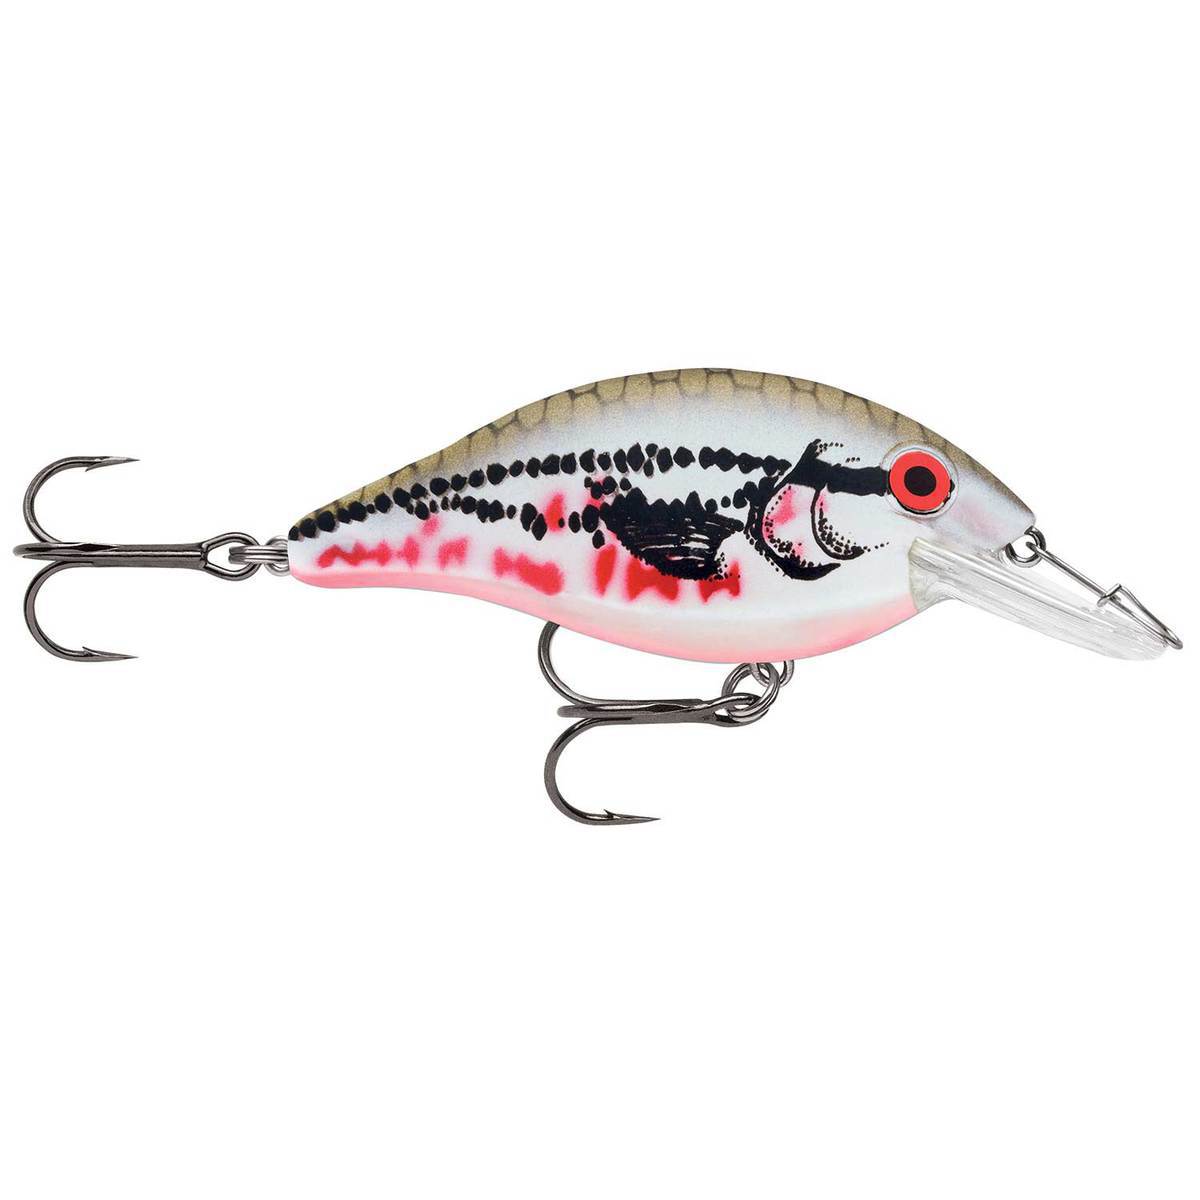 Luhr-Jensen Freshwater Topwater Fishing Baits, Lures for sale